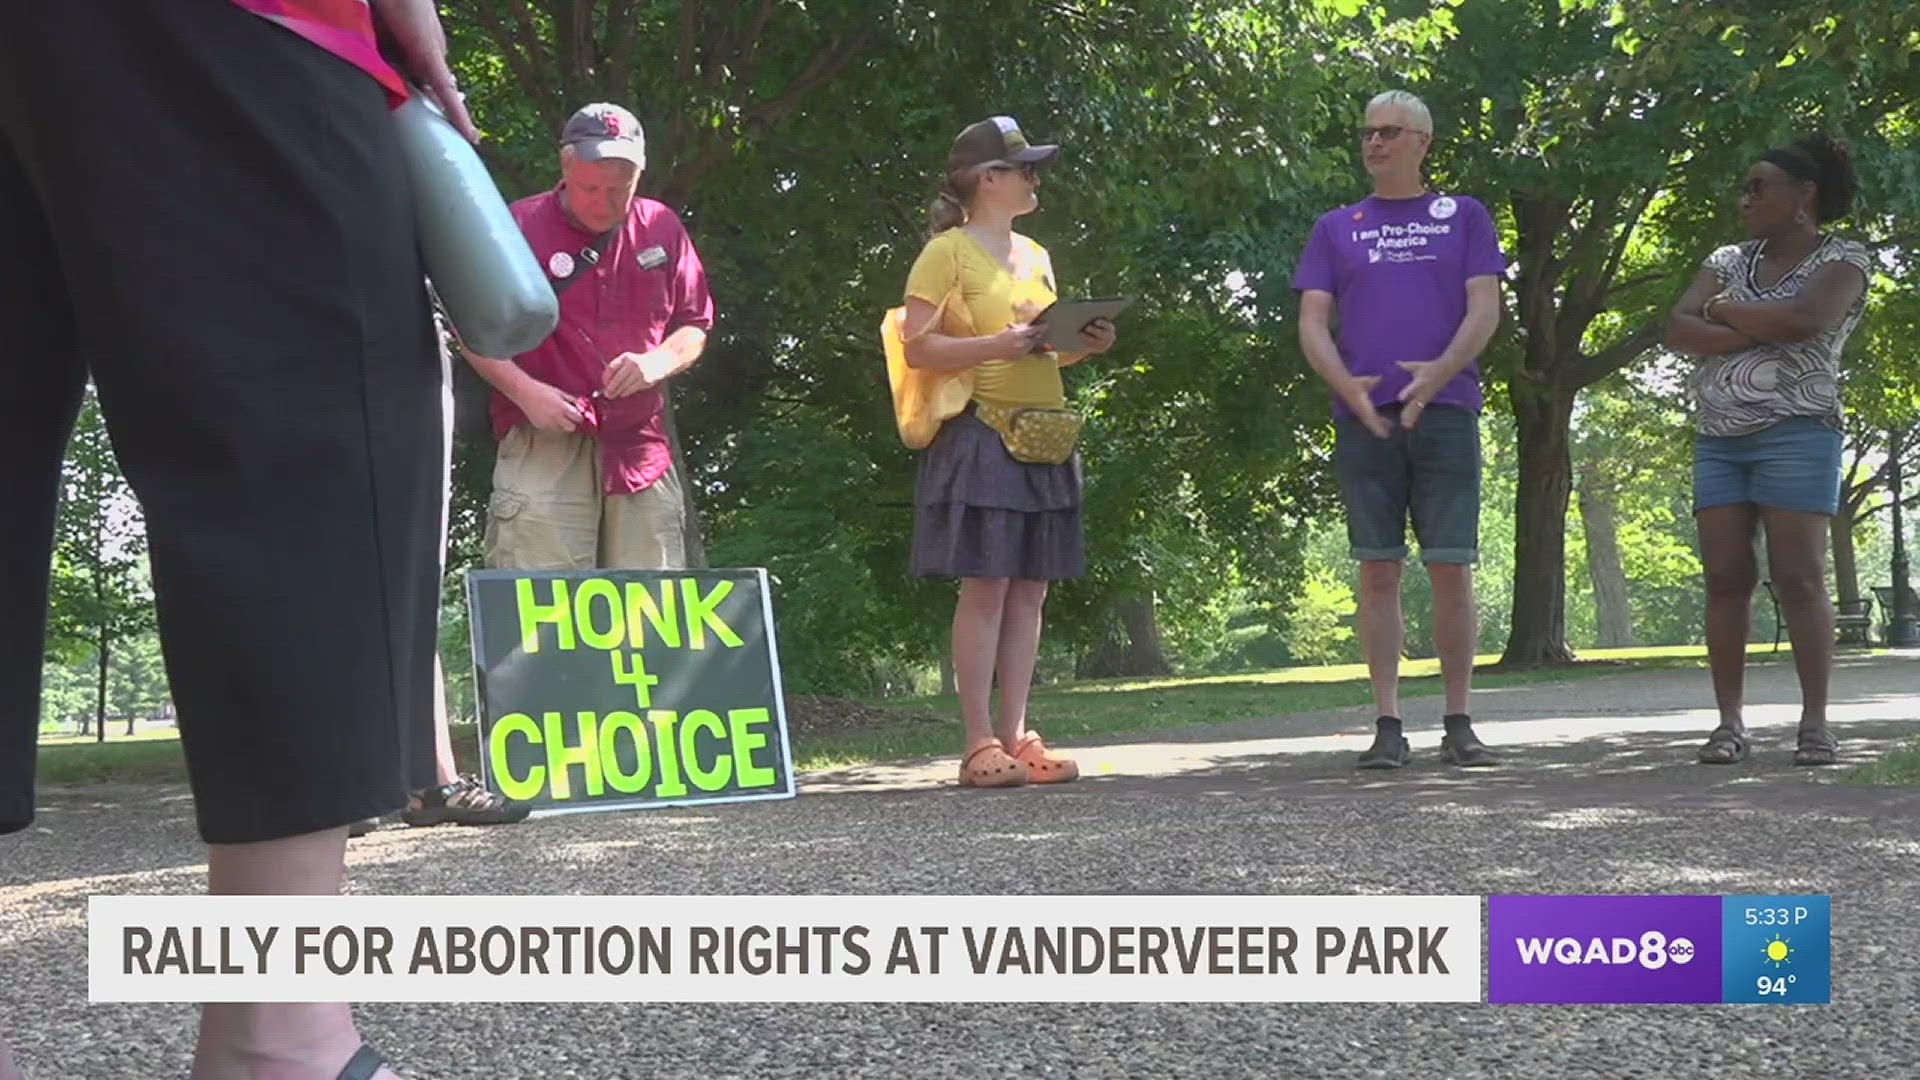 Representatives from local social justice groups held a small rally in Vander Veer Botanical Park.